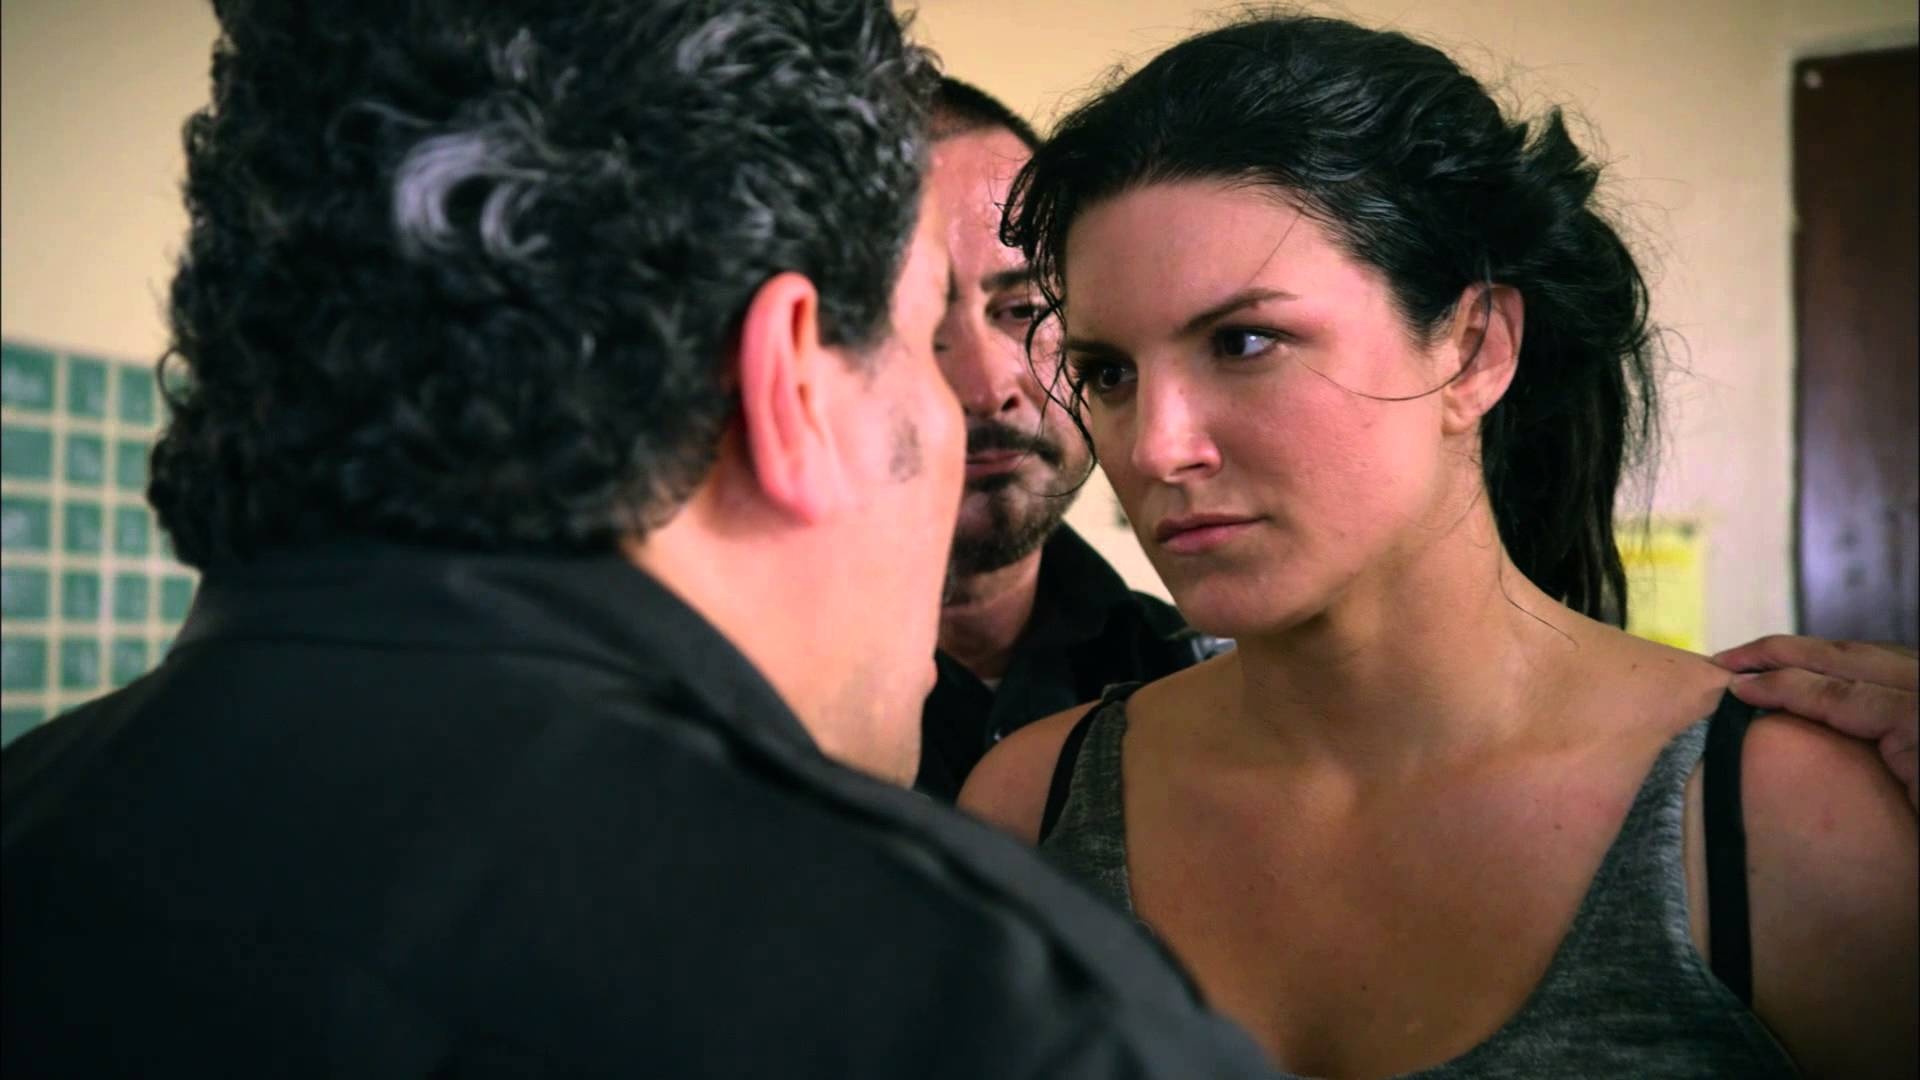 Gina Carano: In the Blood, Movie, Ava, A 14-year-old girl from Bridgeport, Connecticut. 1920x1080 Full HD Wallpaper.